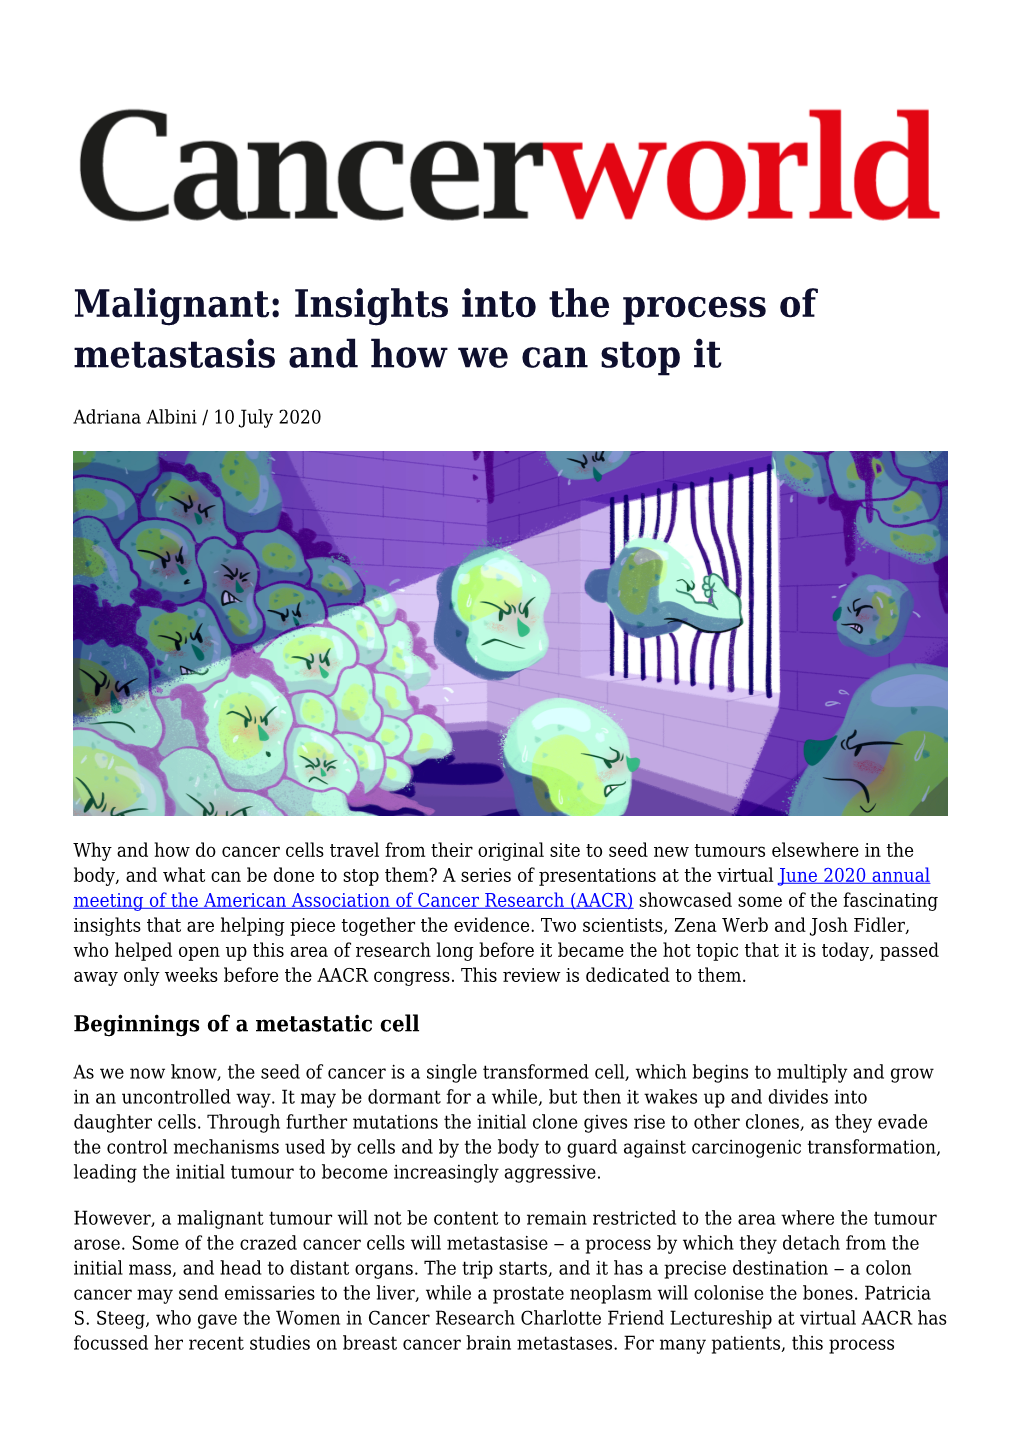 Malignant: Insights Into the Process of Metastasis and How We Can Stop It